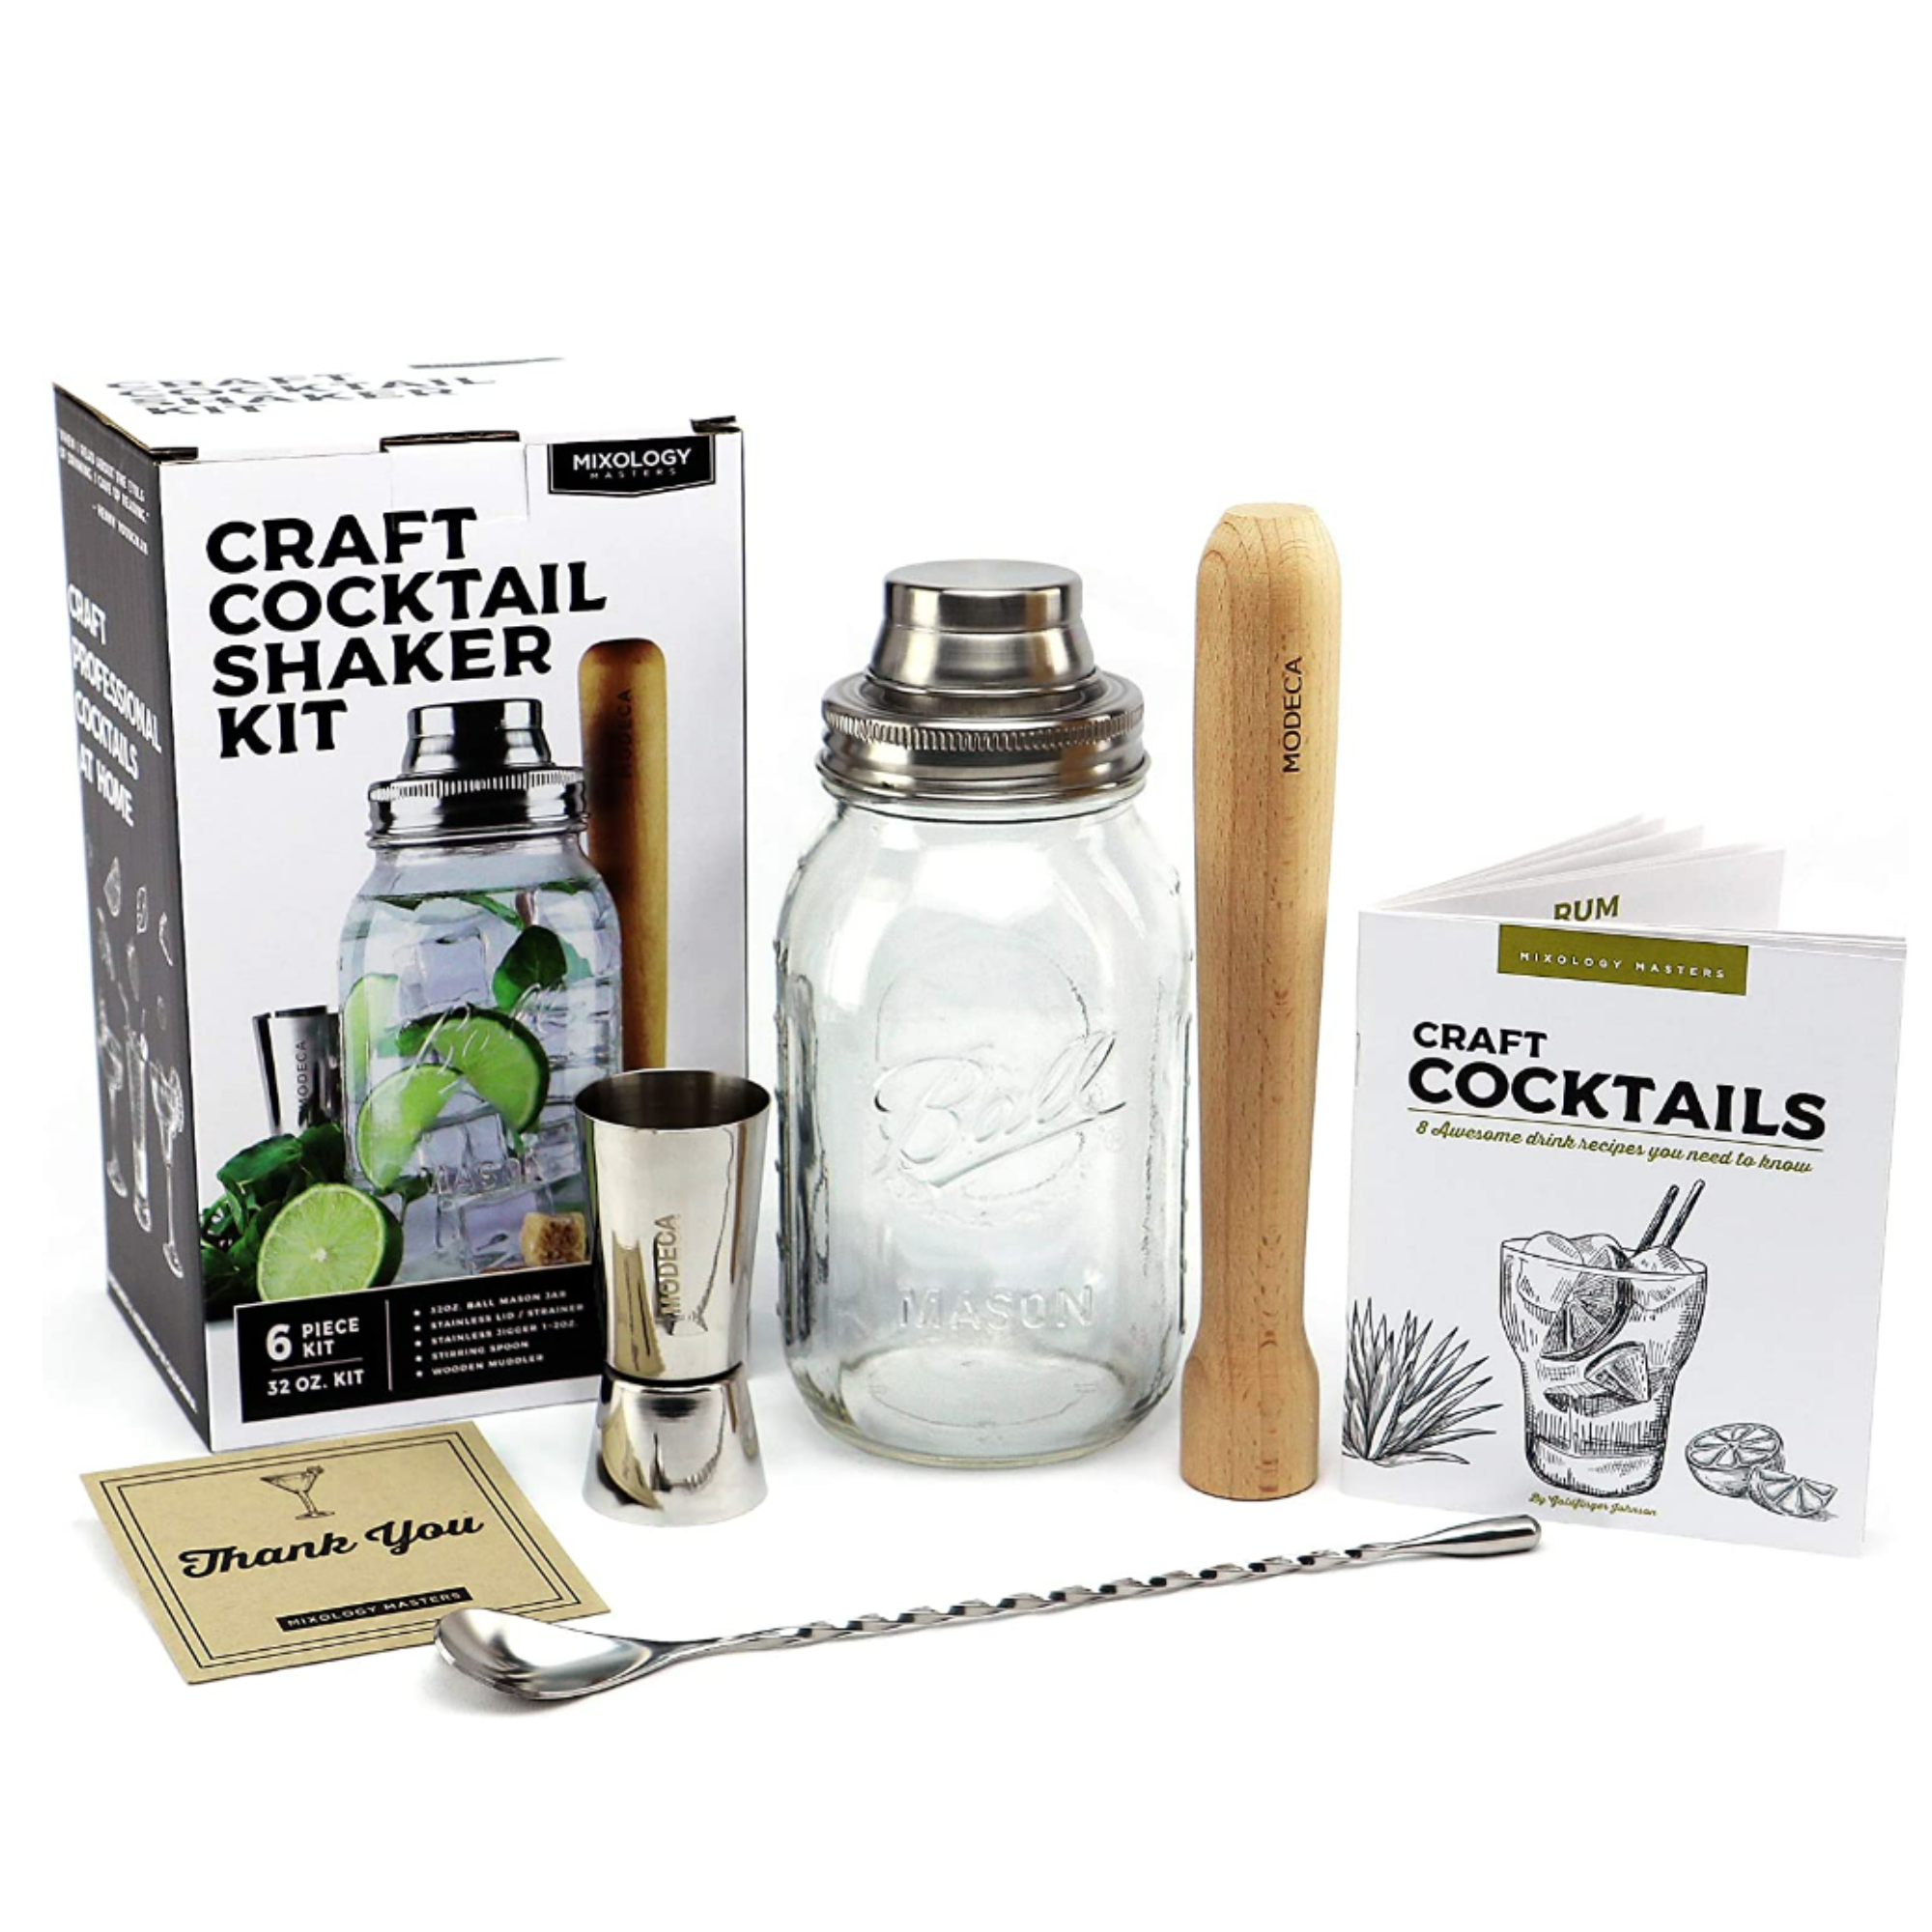 Craft Cocktail Shaker Kit from Amazon, with the shaker in a classic mason jar shape!